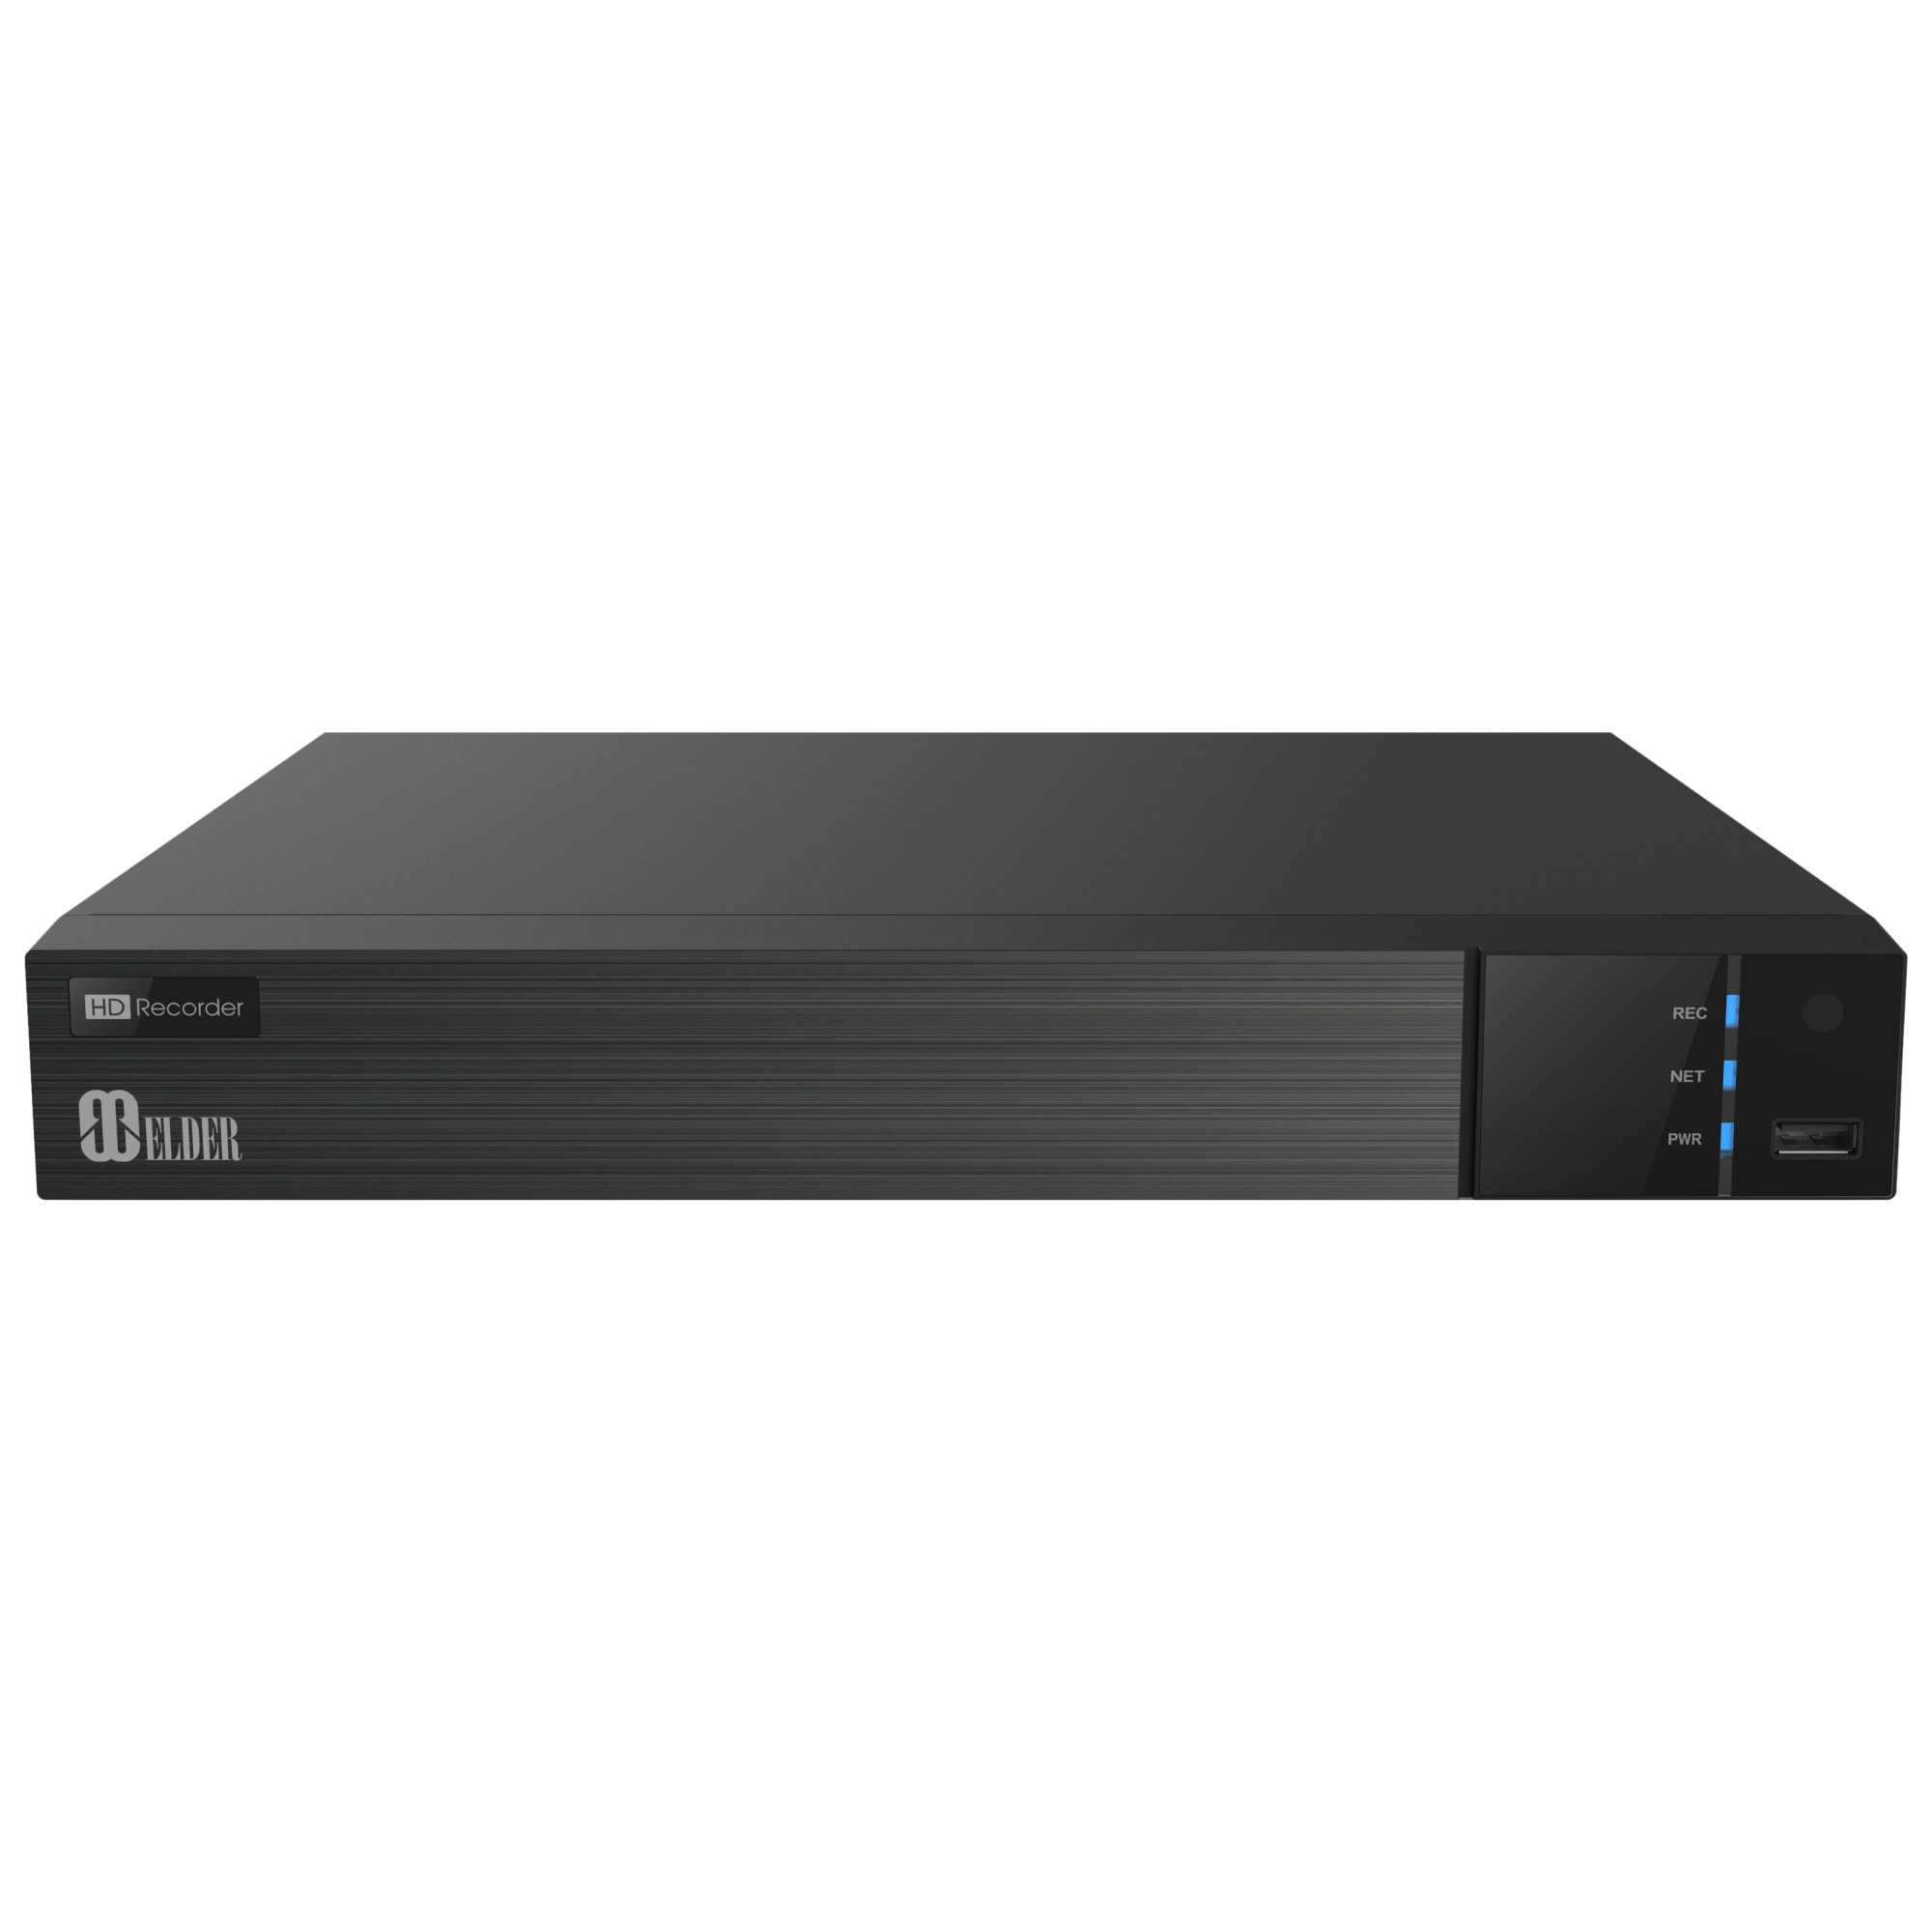 4K NVR Security PoE 16-Channel Up to 8MP, Intelligent Features, Face & License Plate Recognition LPR, Two-Way Audio & Onvif, NVR Surveillance Ultimate-I Series